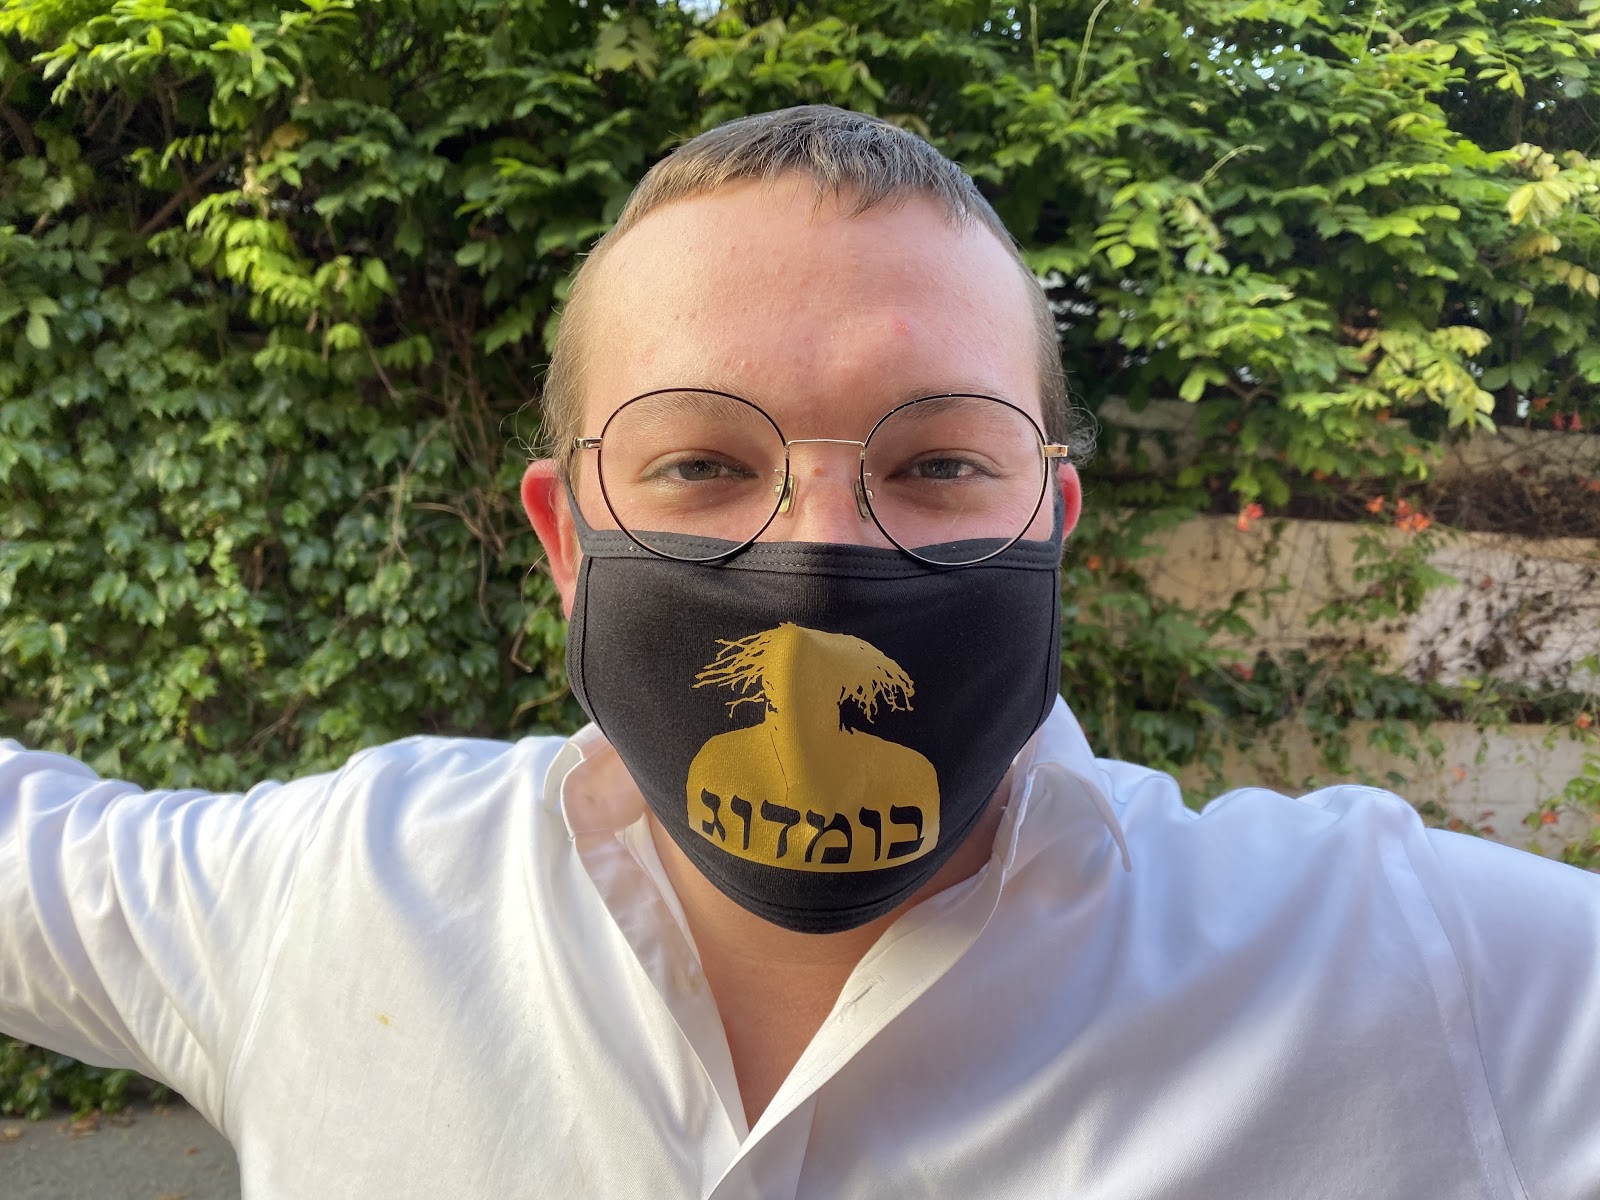 Dovi was the first to buy one of my masks in Hebrew.